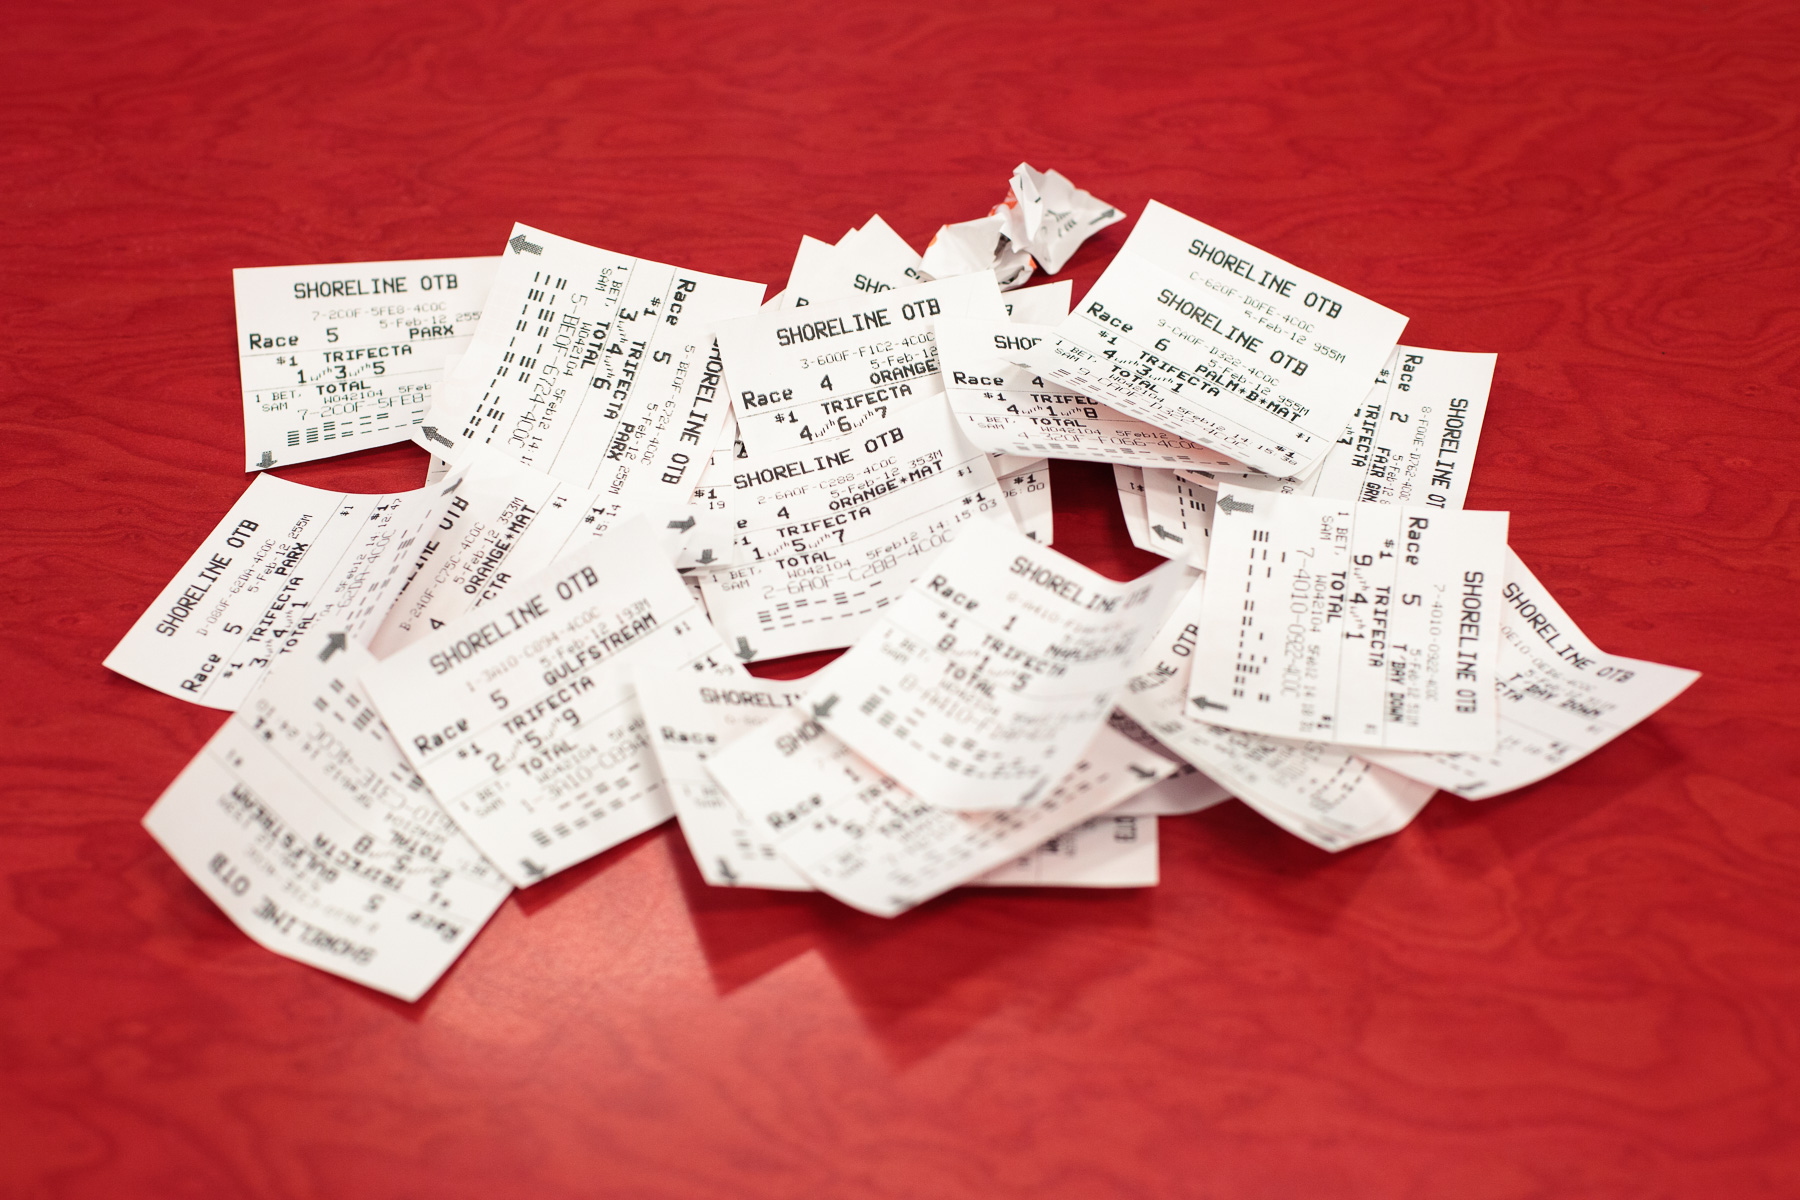 Betting slips at the Greyhound Racetrack in Bridgeport, CT.